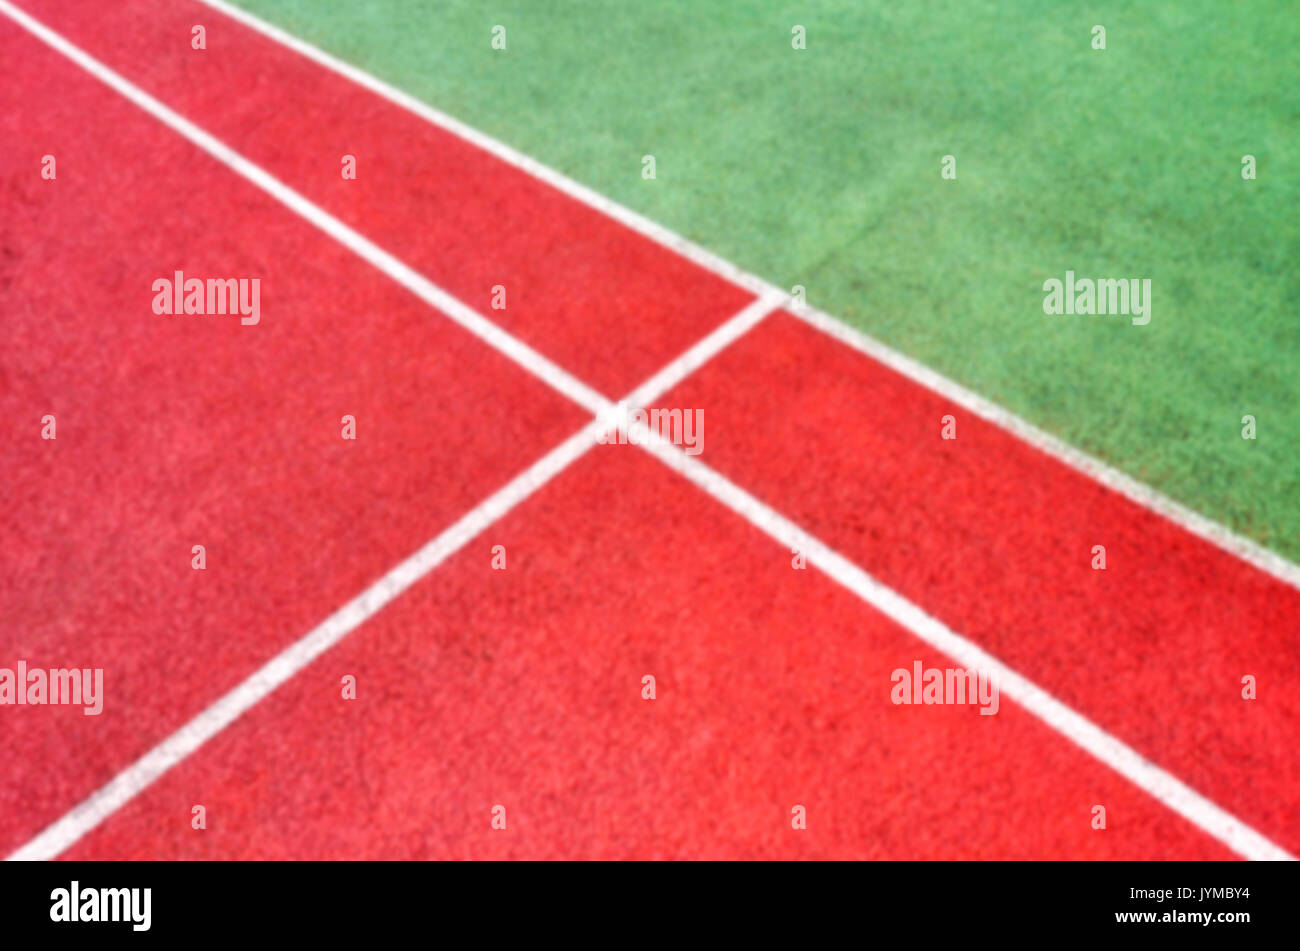 Blurred picture of an outdoor playing field, sport concept background. Stock Photo